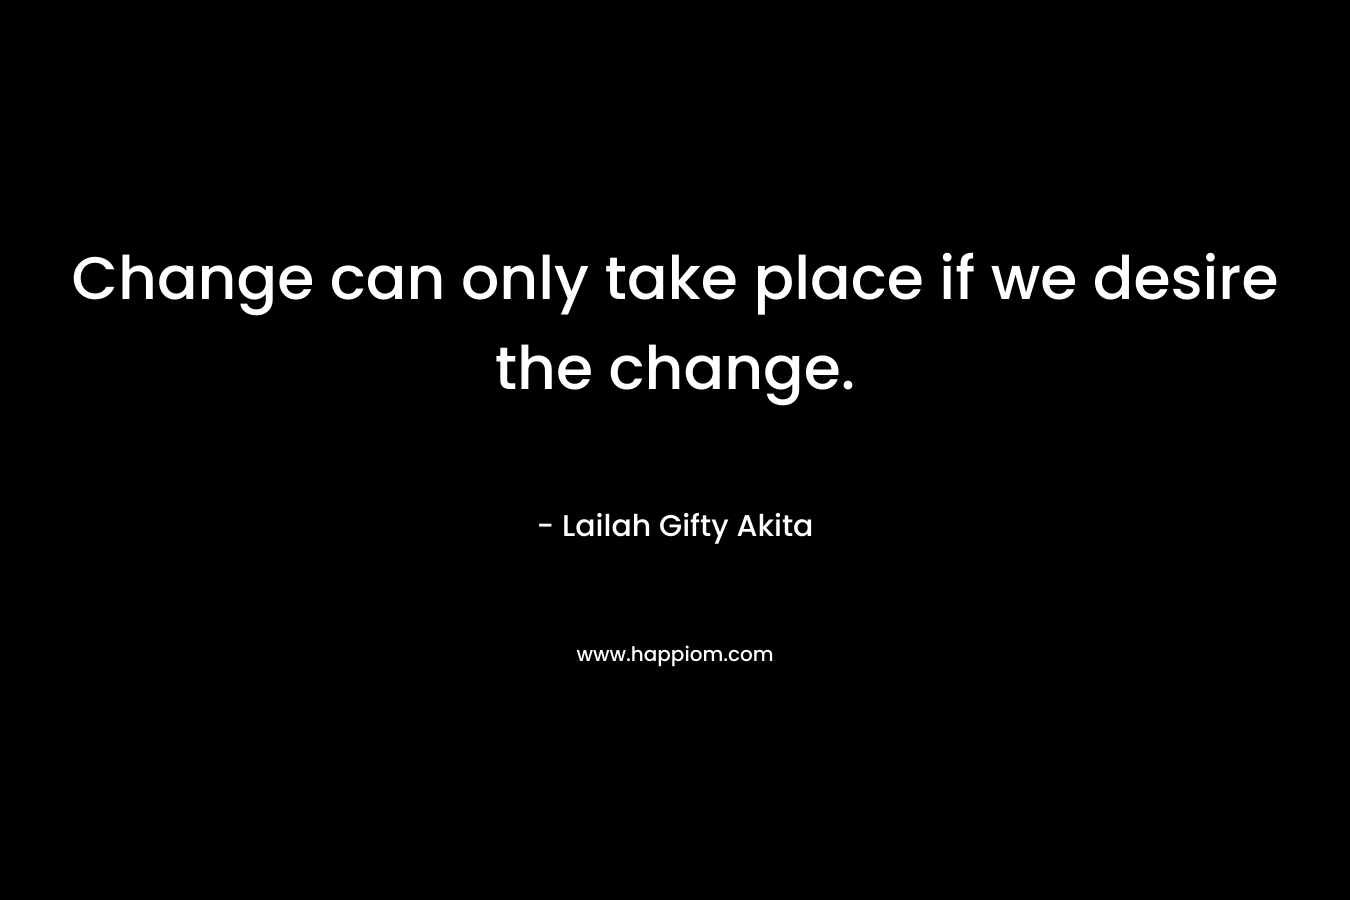 Change can only take place if we desire the change.